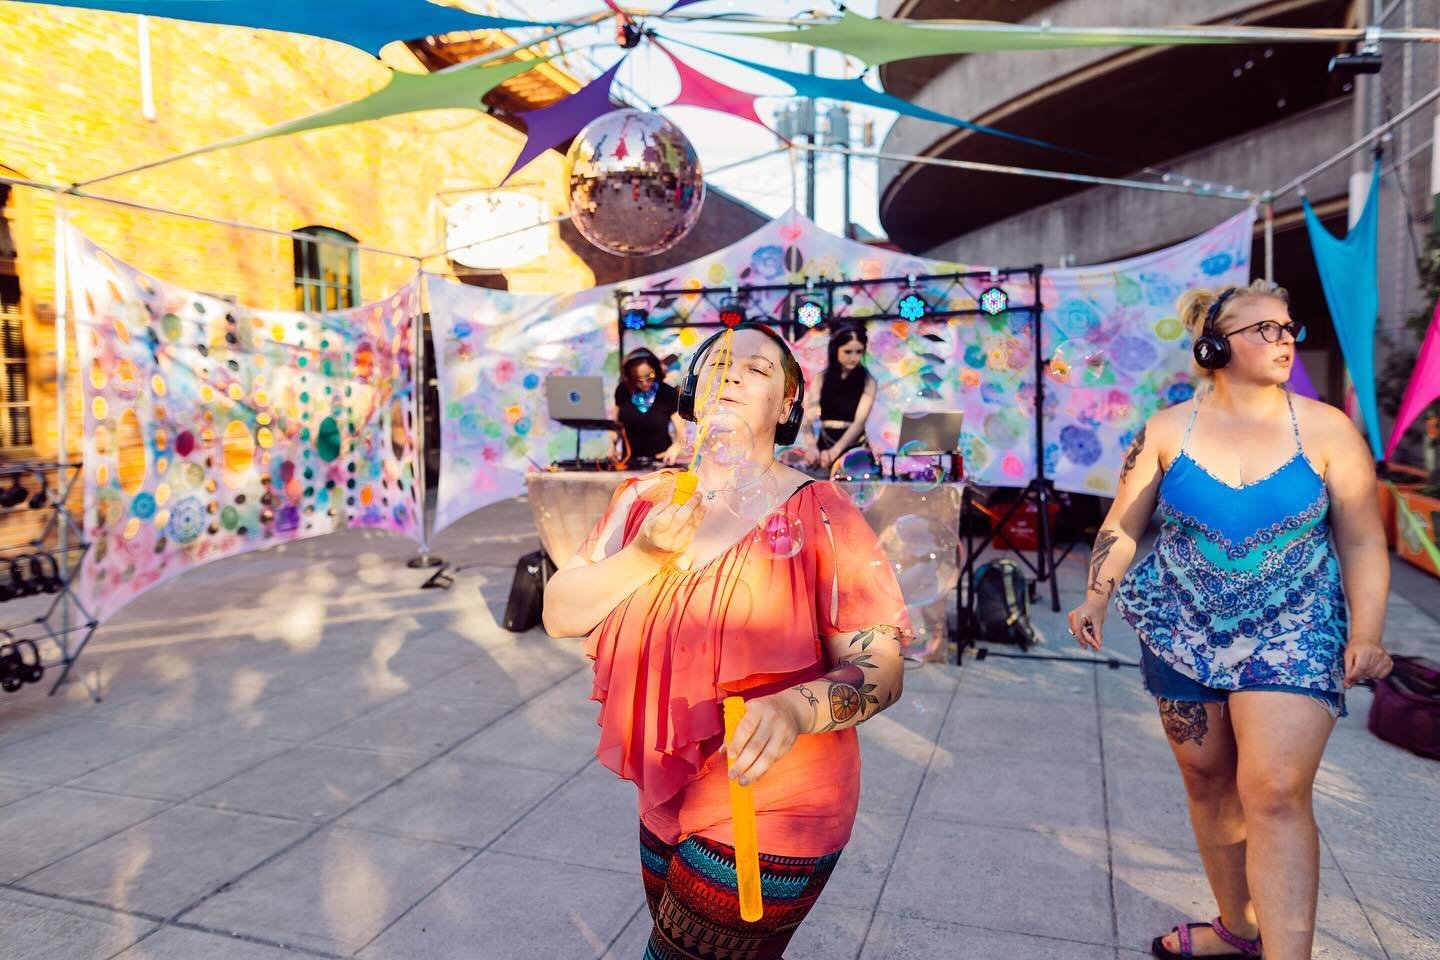 Applications are still open for the Community Activation Zone Grant! 

This grant is available for events happening on the 1300 block of Commercial Street from June-October. Silent discos, block parties, artistic performances, fashion shows, temporar